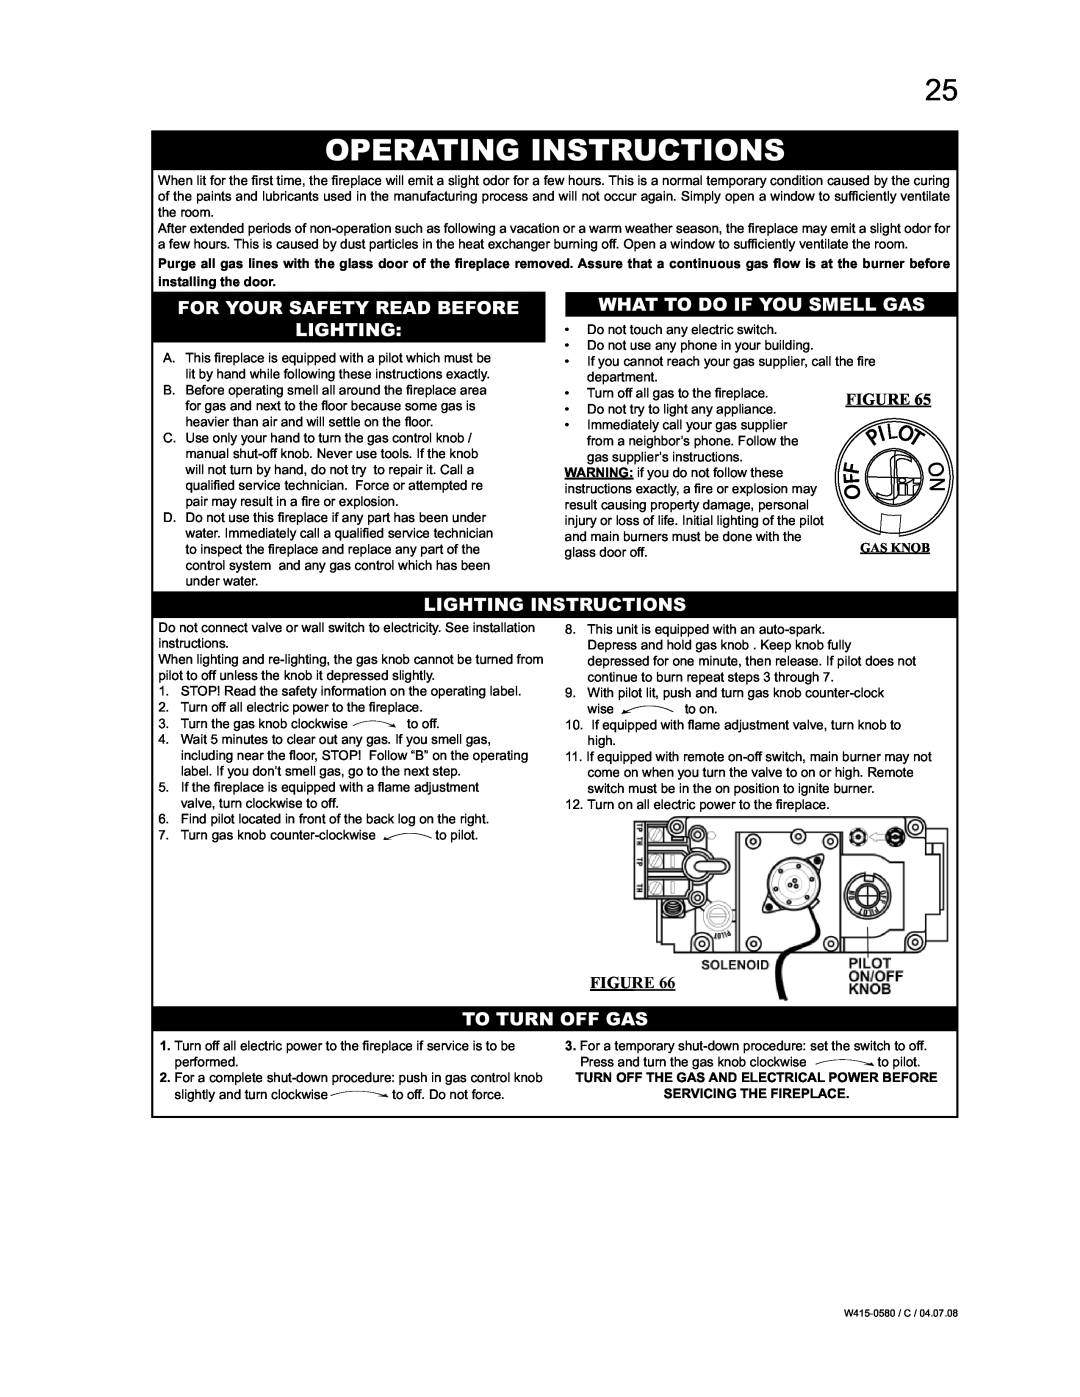 Napoleon Fireplaces BGD90NT Operating Instructions, For Your Safety Read Before Lighting, What To Do If You Smell Gas 